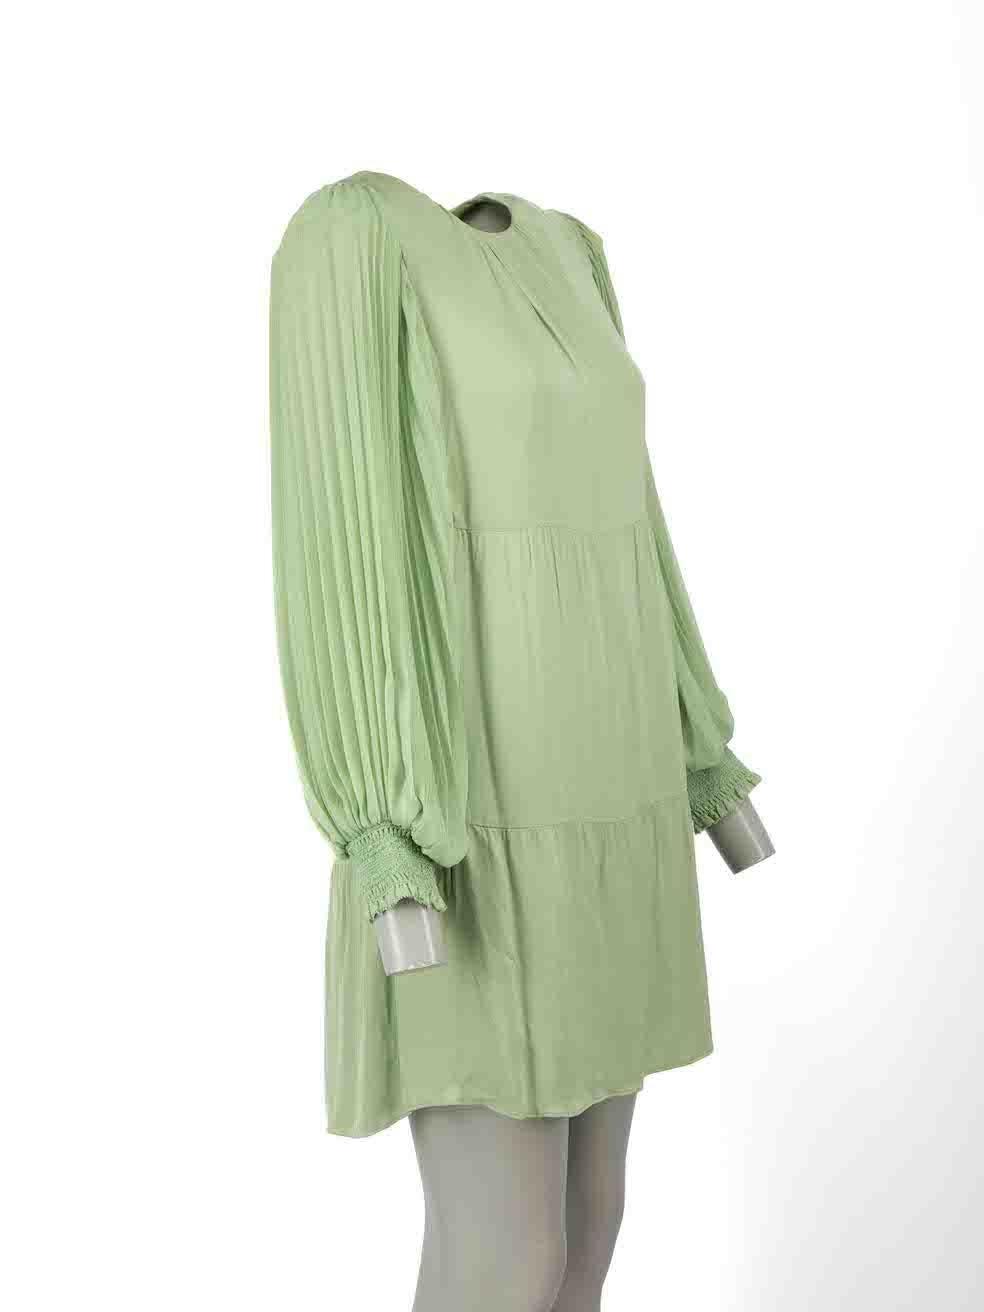 CONDITION is Never worn, with tags. No visible wear to dress is evident on this new Alice + Olivia designer resale item.
 
Details
Green
Viscose
Dress
Long puff sleeves
Mini
Round neck
Back zip and hook fastening

Made in China
 
Composition
100%